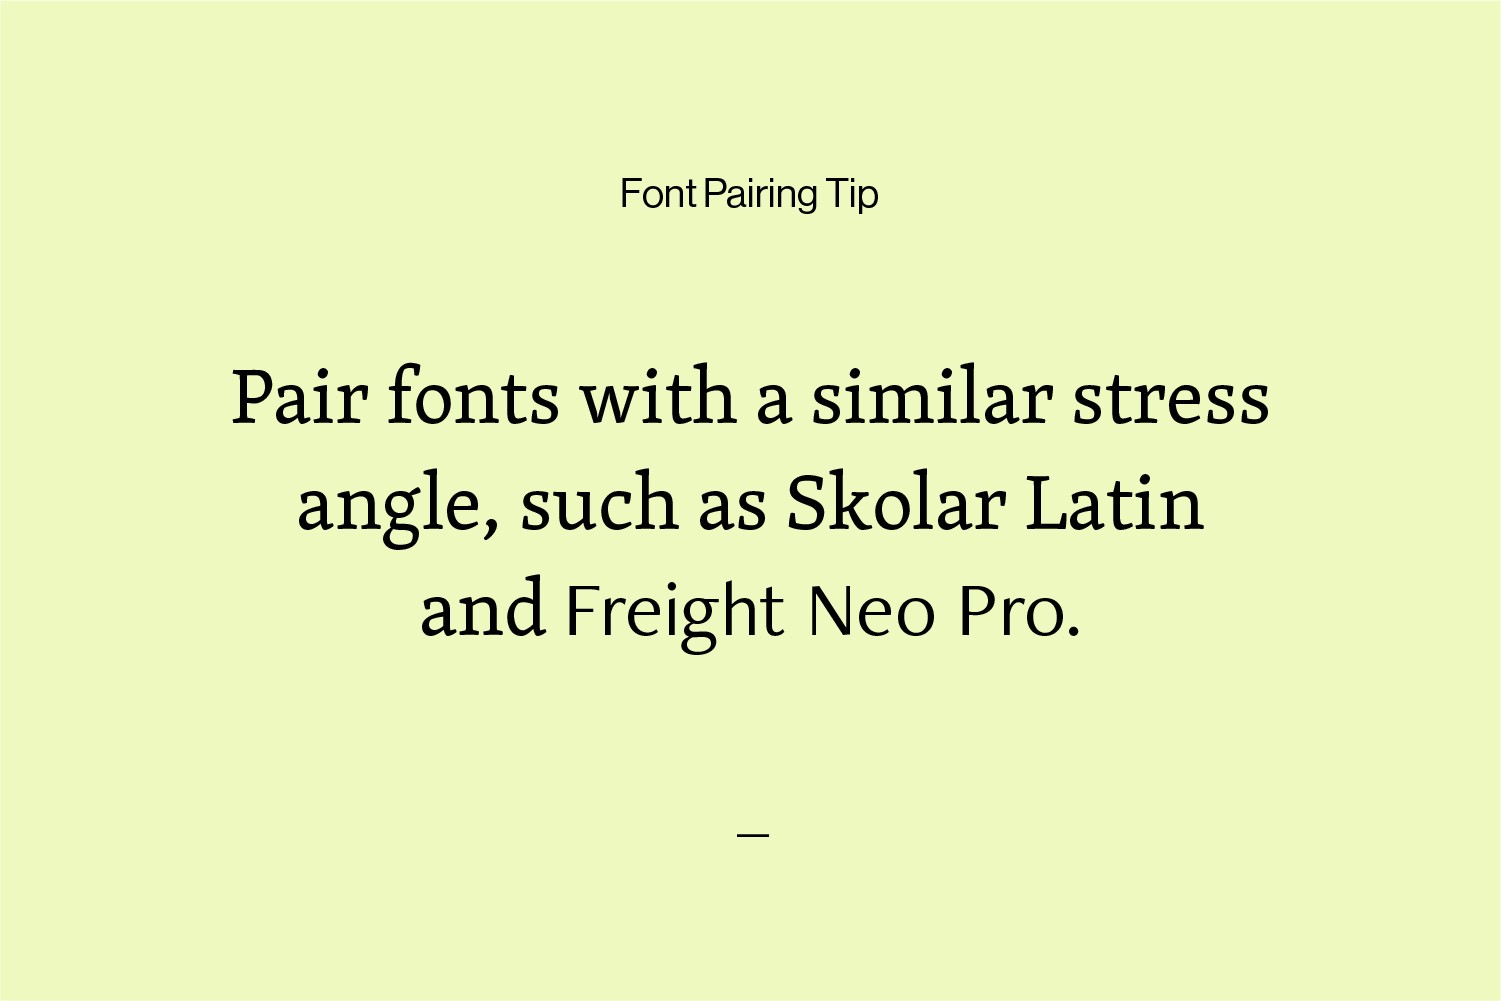 Font pairing advice that reads: